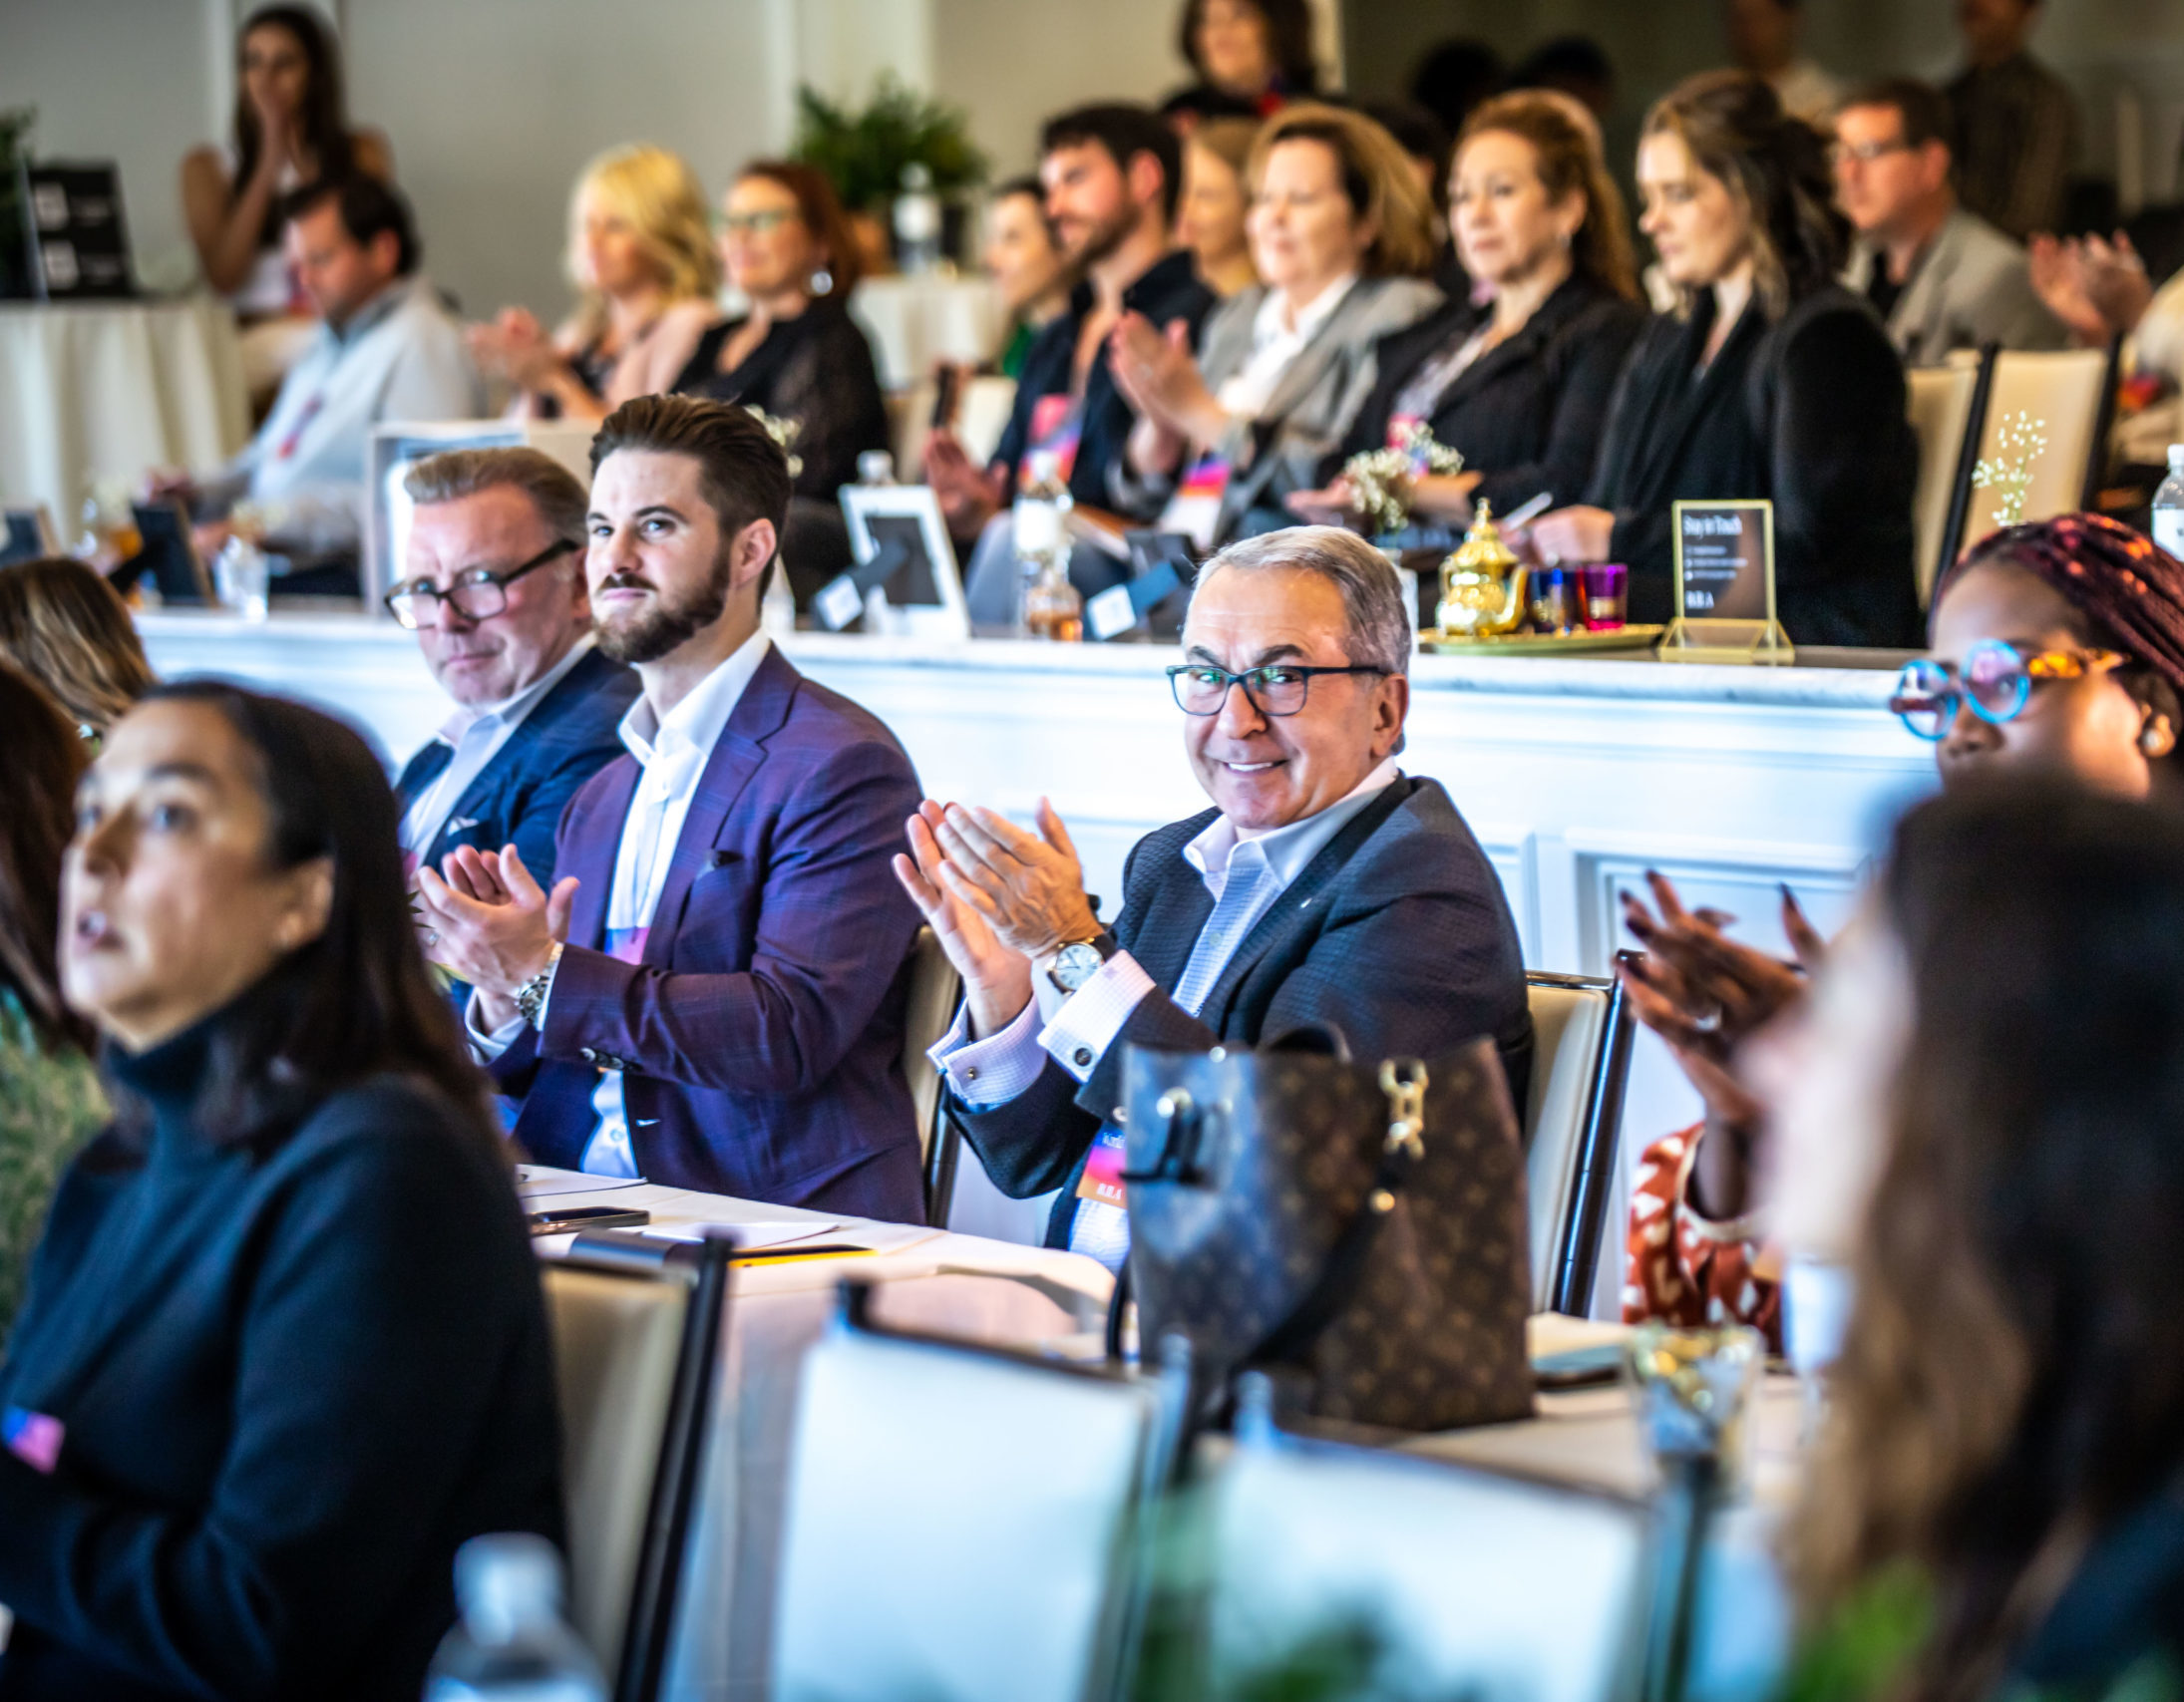 Boutique Hotel Owners Set the Pace for the Future of Hospitality at the BLLA Conference